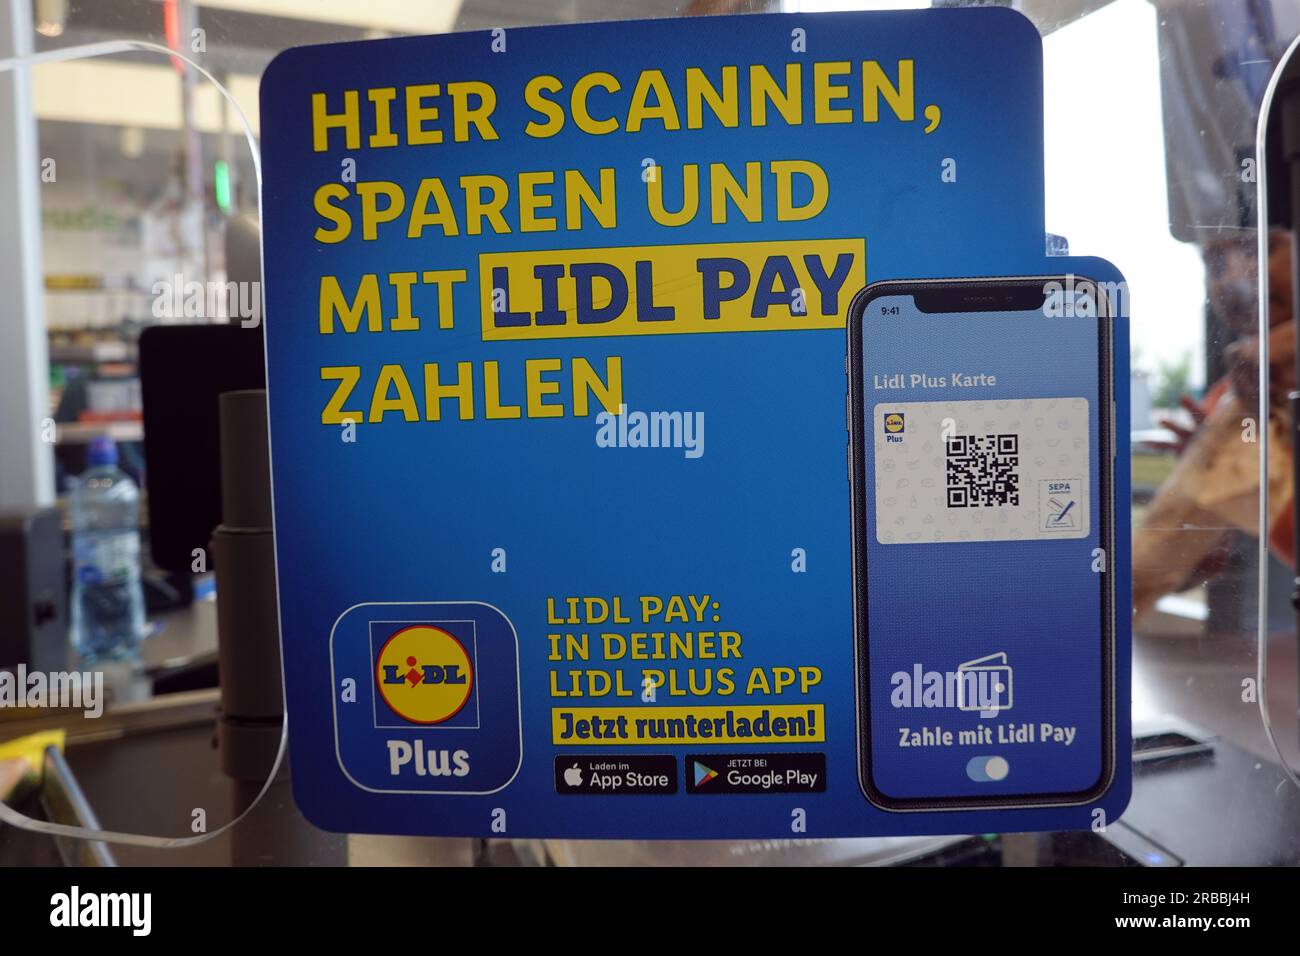 LIDL Pay, eigenes Zahlungssystem des Discounters Stock Photo